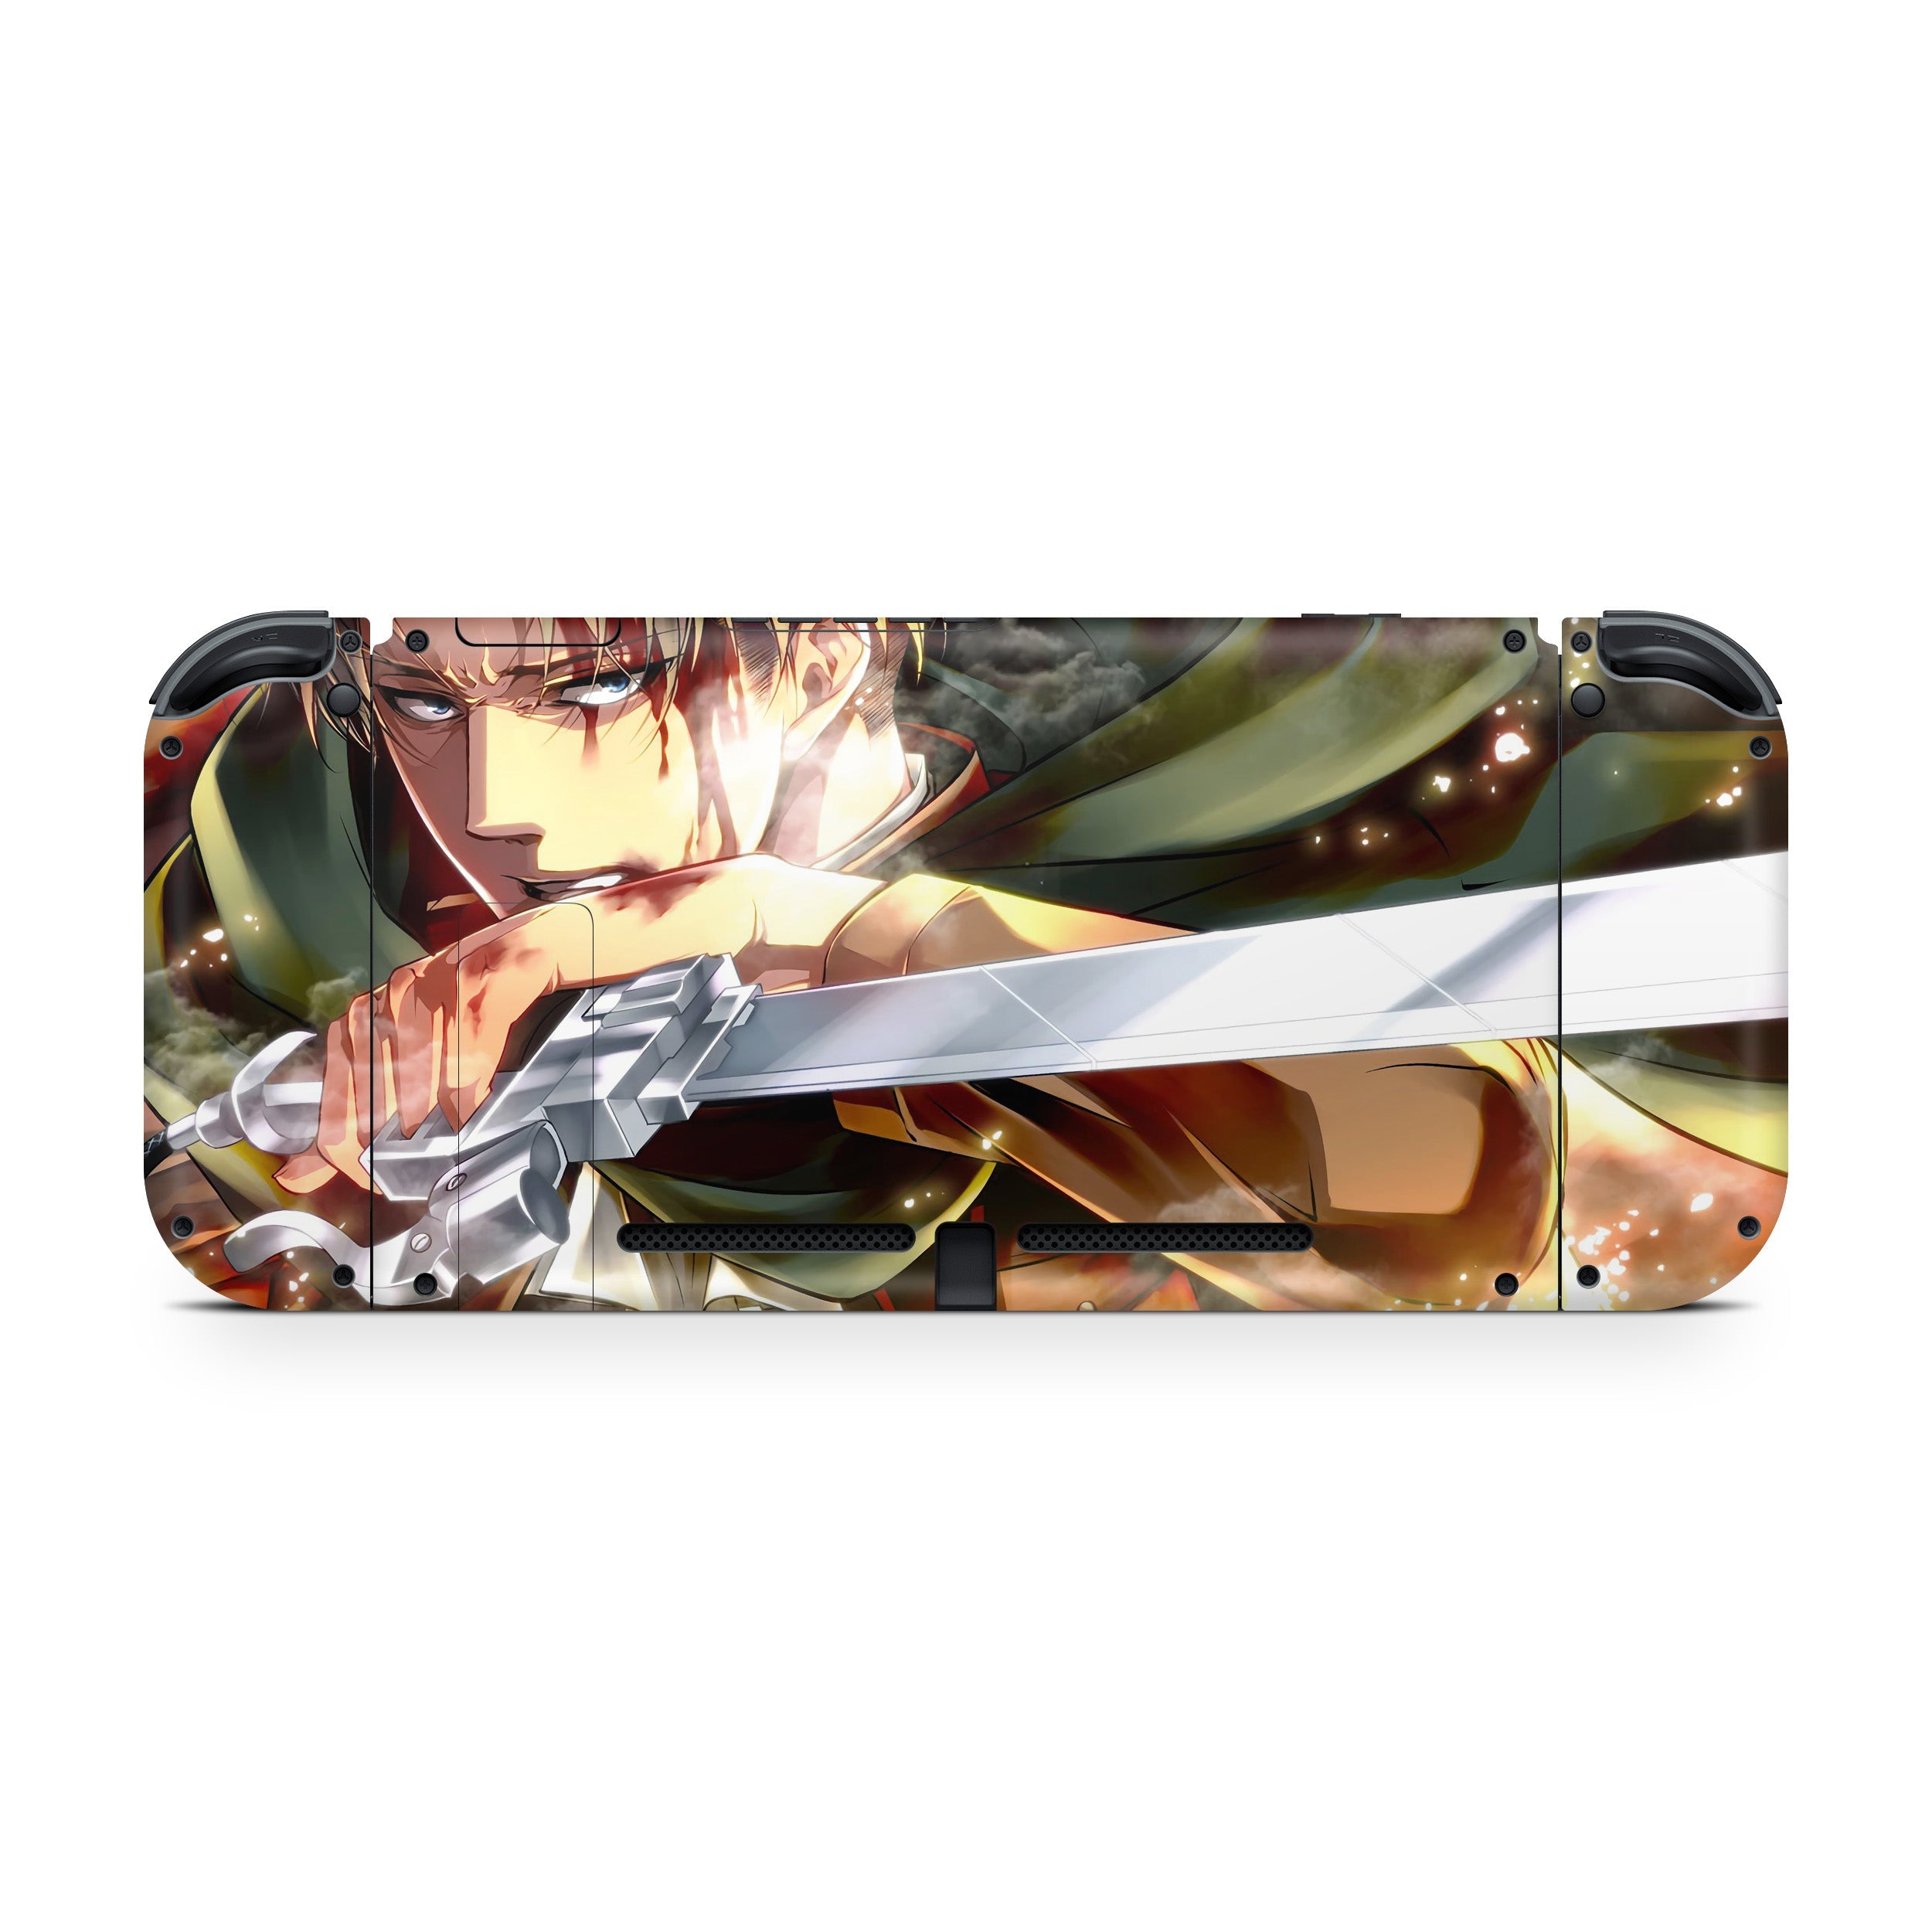 A video game skin featuring a Attack On Titan Levi Ackerman design for the Nintendo Switch.